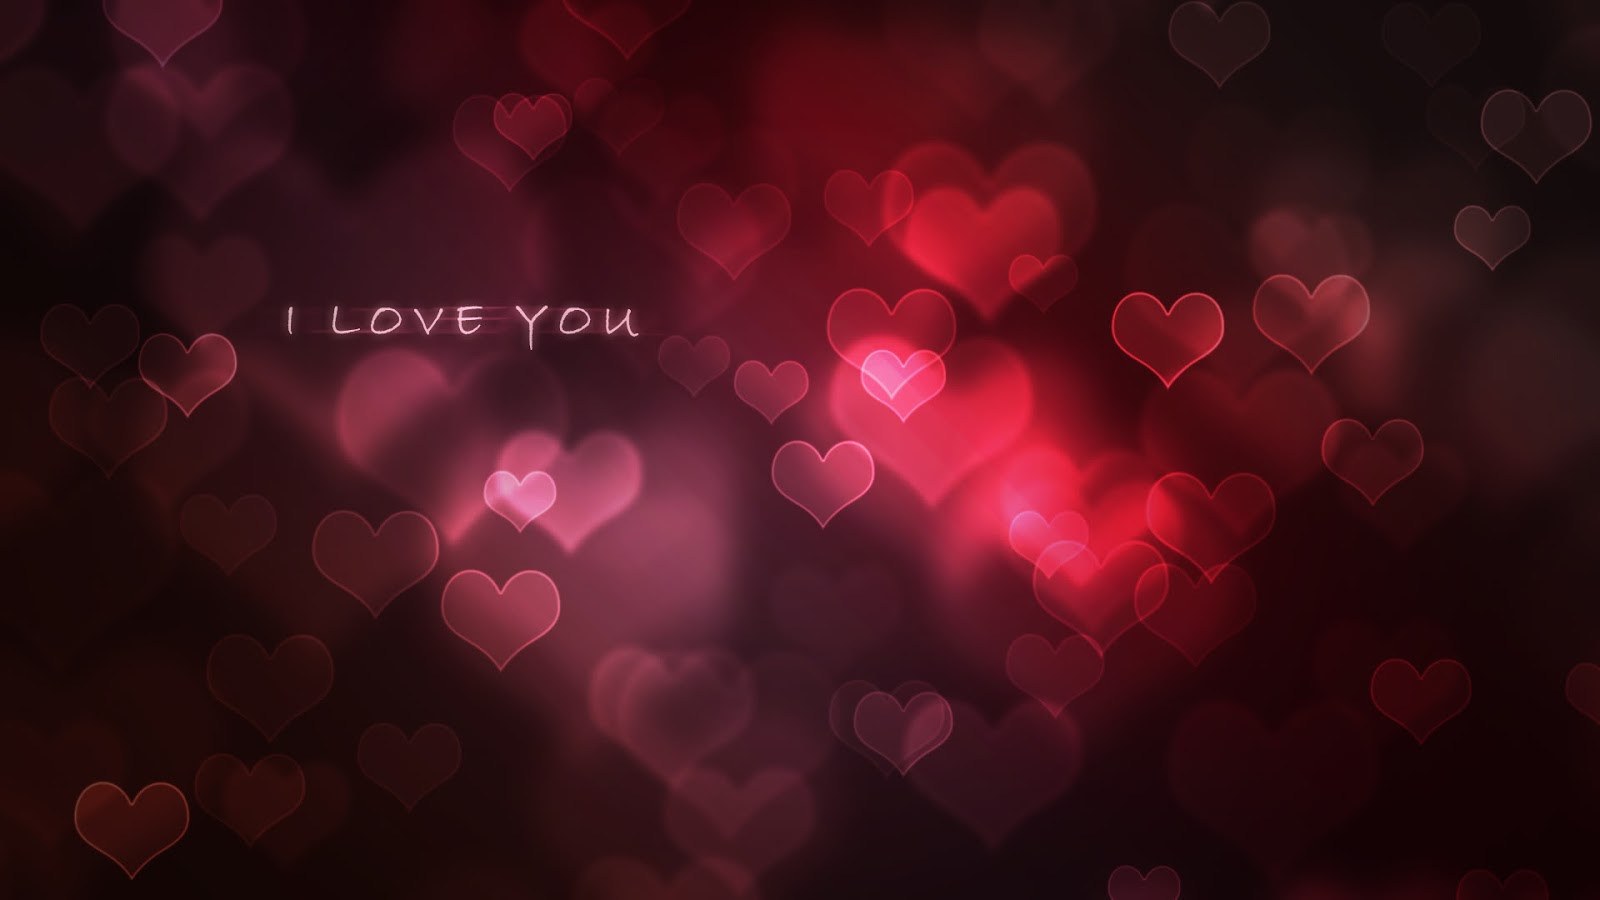 I Love You Ilu Pictures Photos And Hd Wallpapers 2016 HD Wallpapers Download Free Images Wallpaper [wallpaper981.blogspot.com]